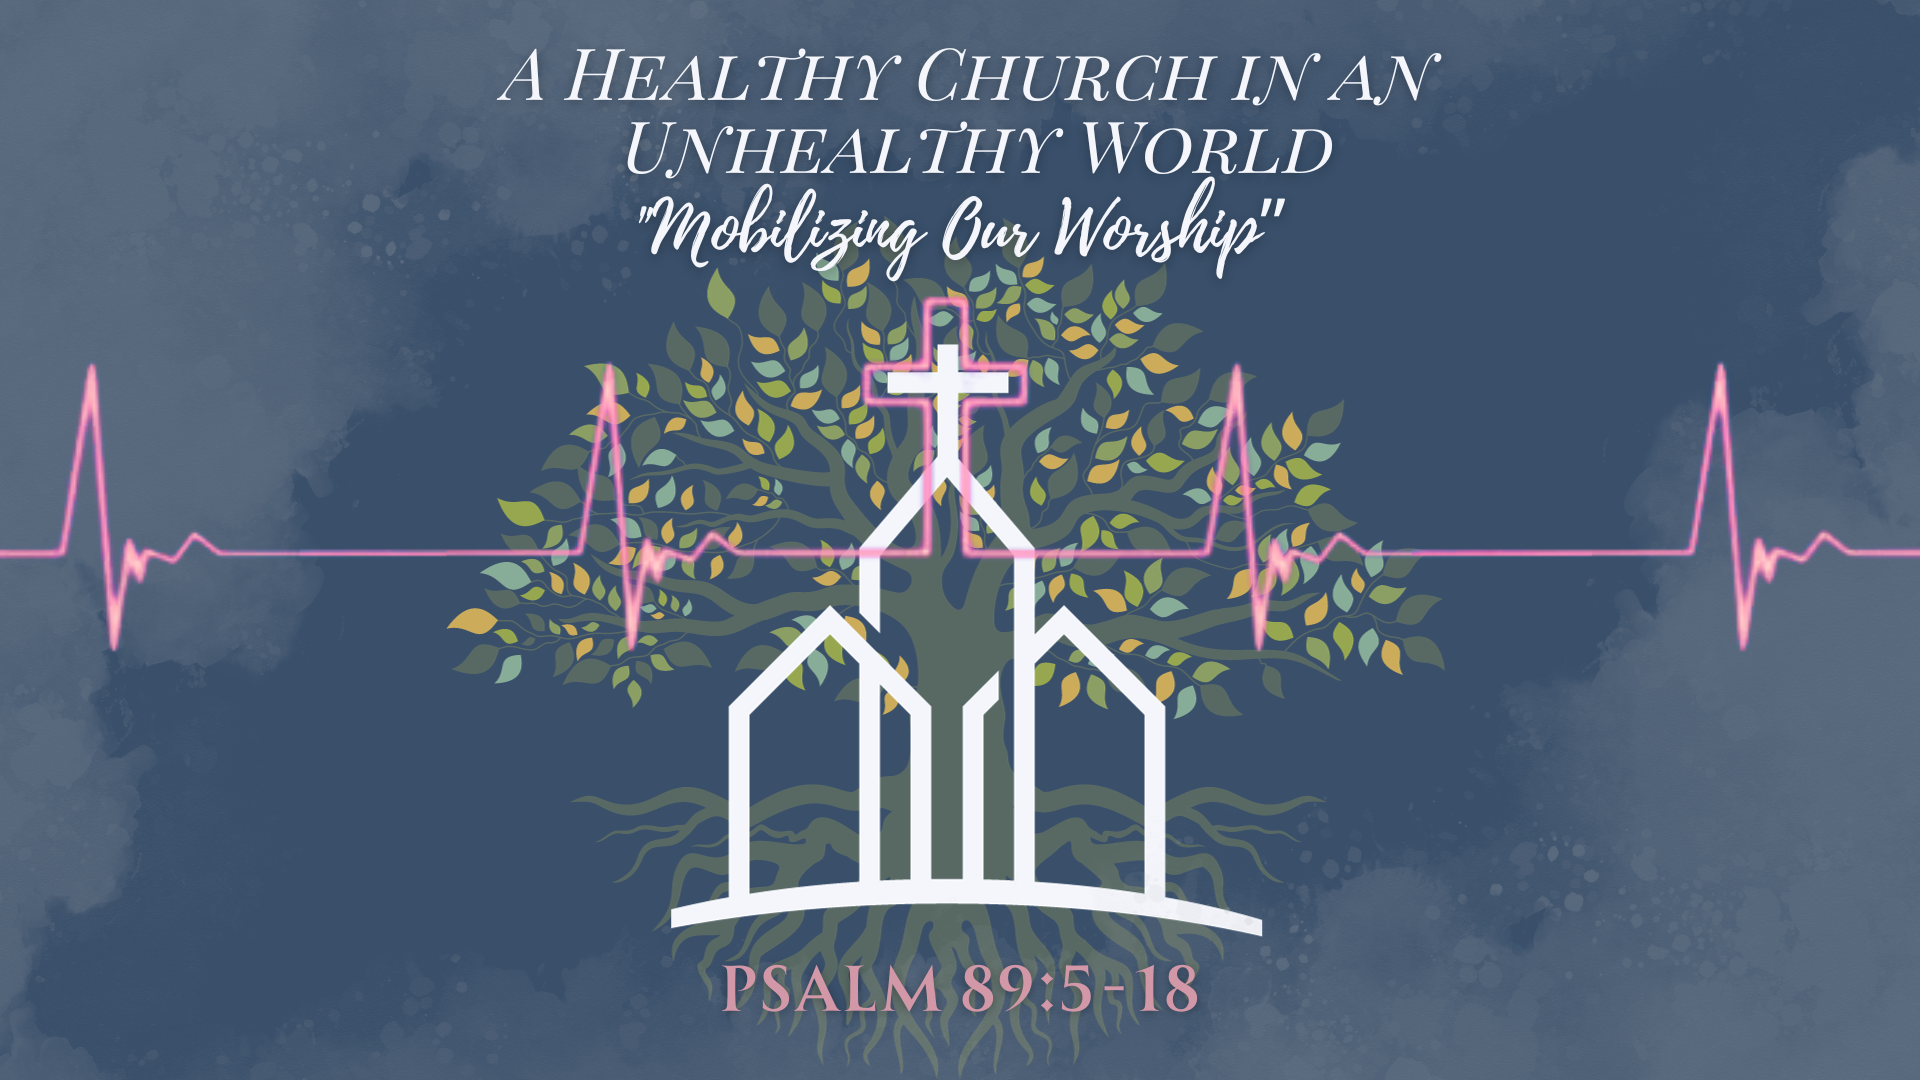 Mobilizing Our Worship